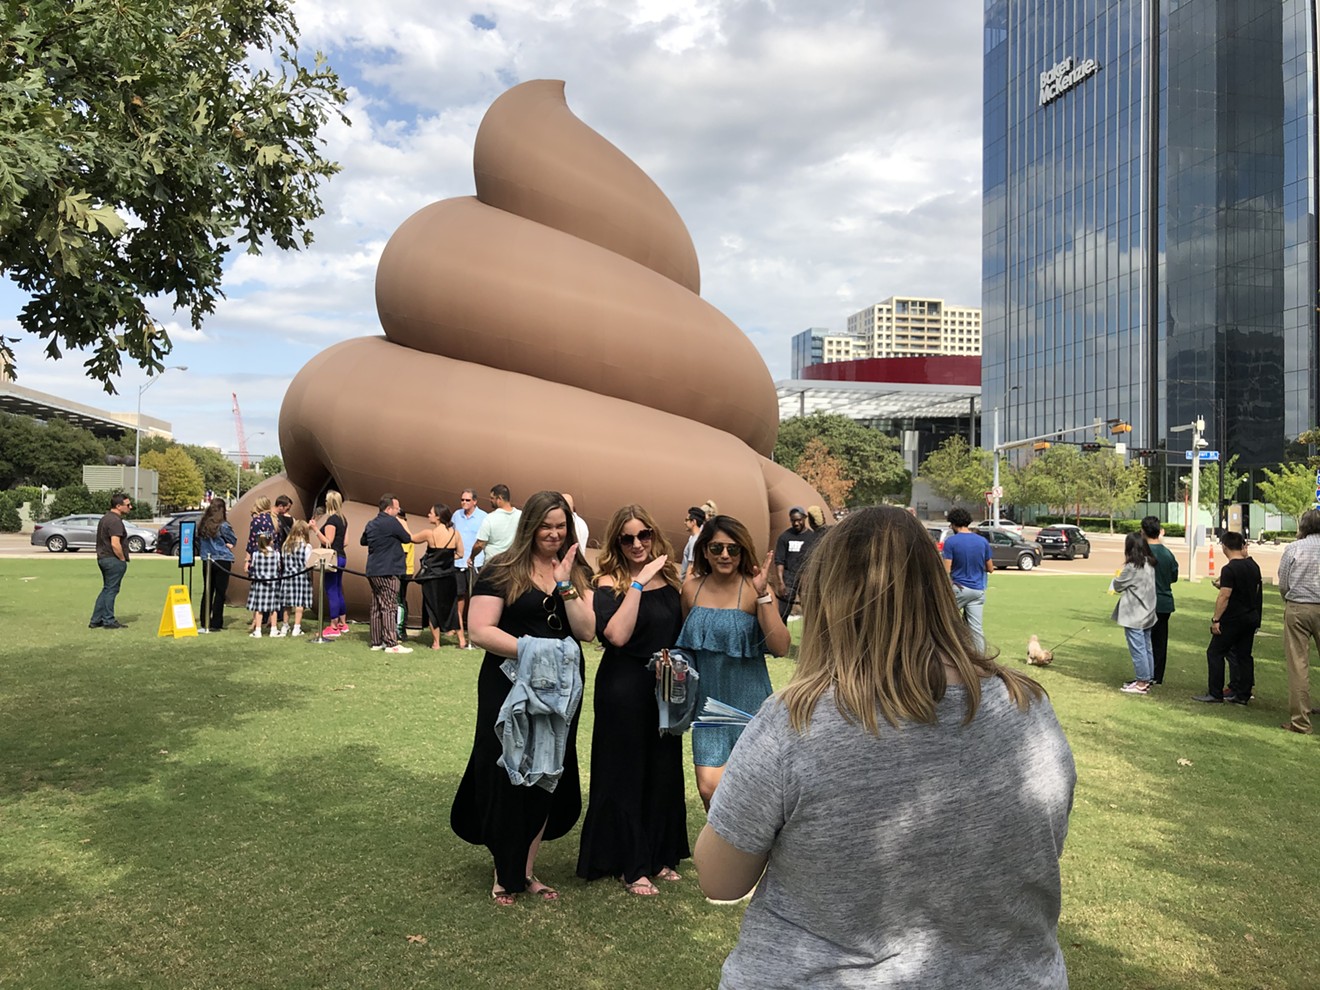 Kelly Gardner, Lisa Manz and Minal Patel pose for a photo in front of a giant, billowy turd that popped up on the northeastern part of Klyde Warren Park.